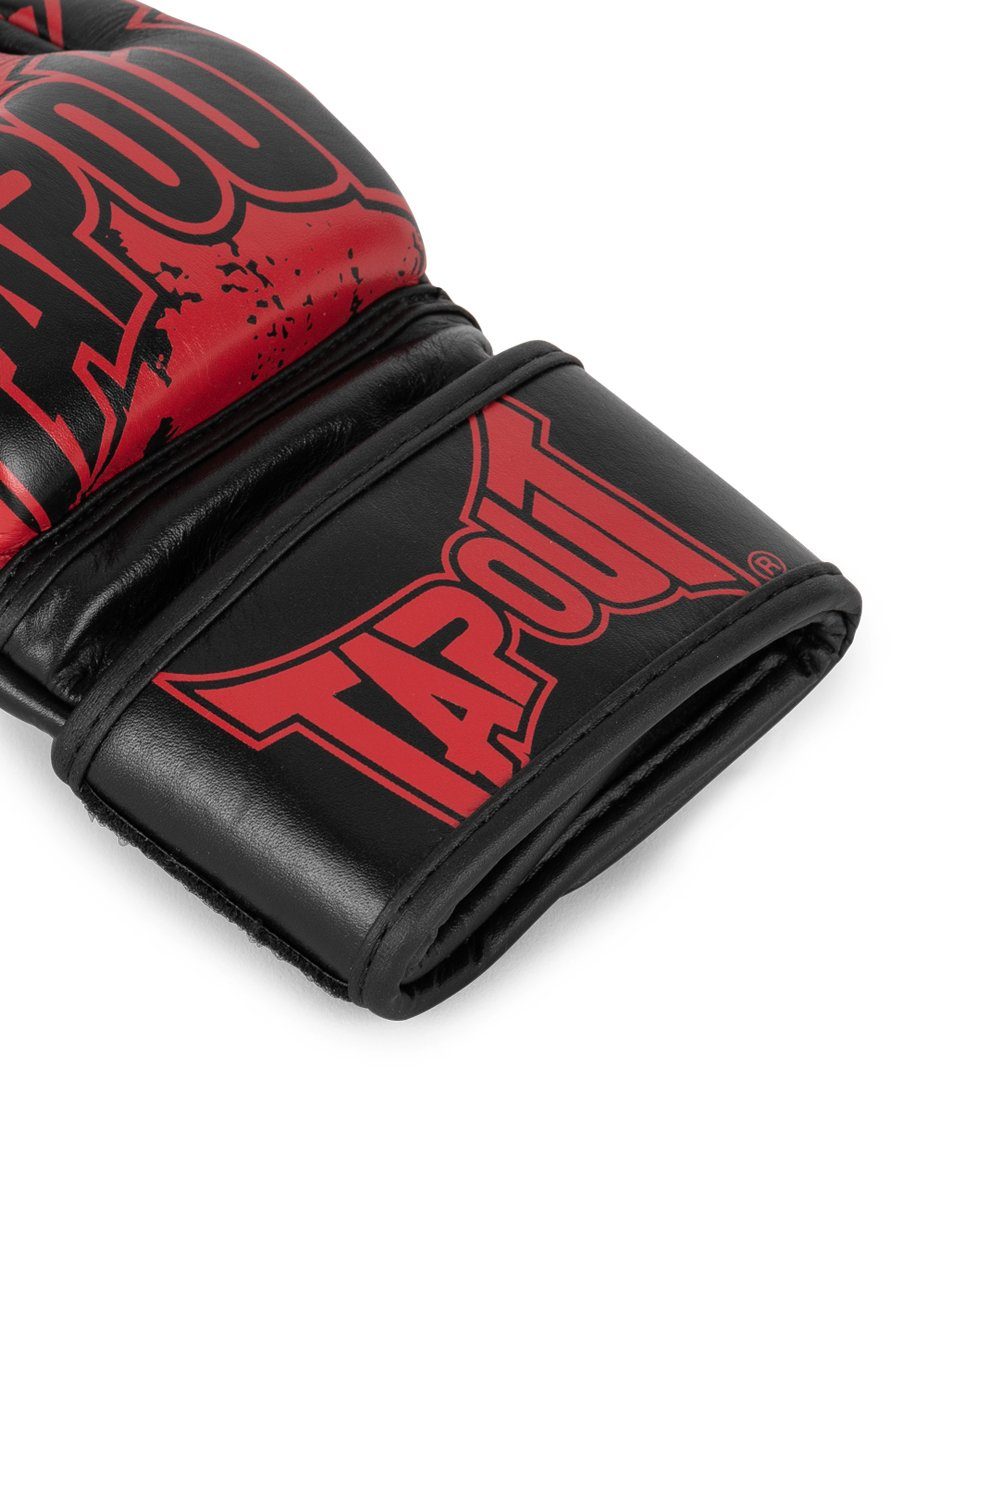 TAPOUT MMA-Handschuhe MMA PRO Black/Red